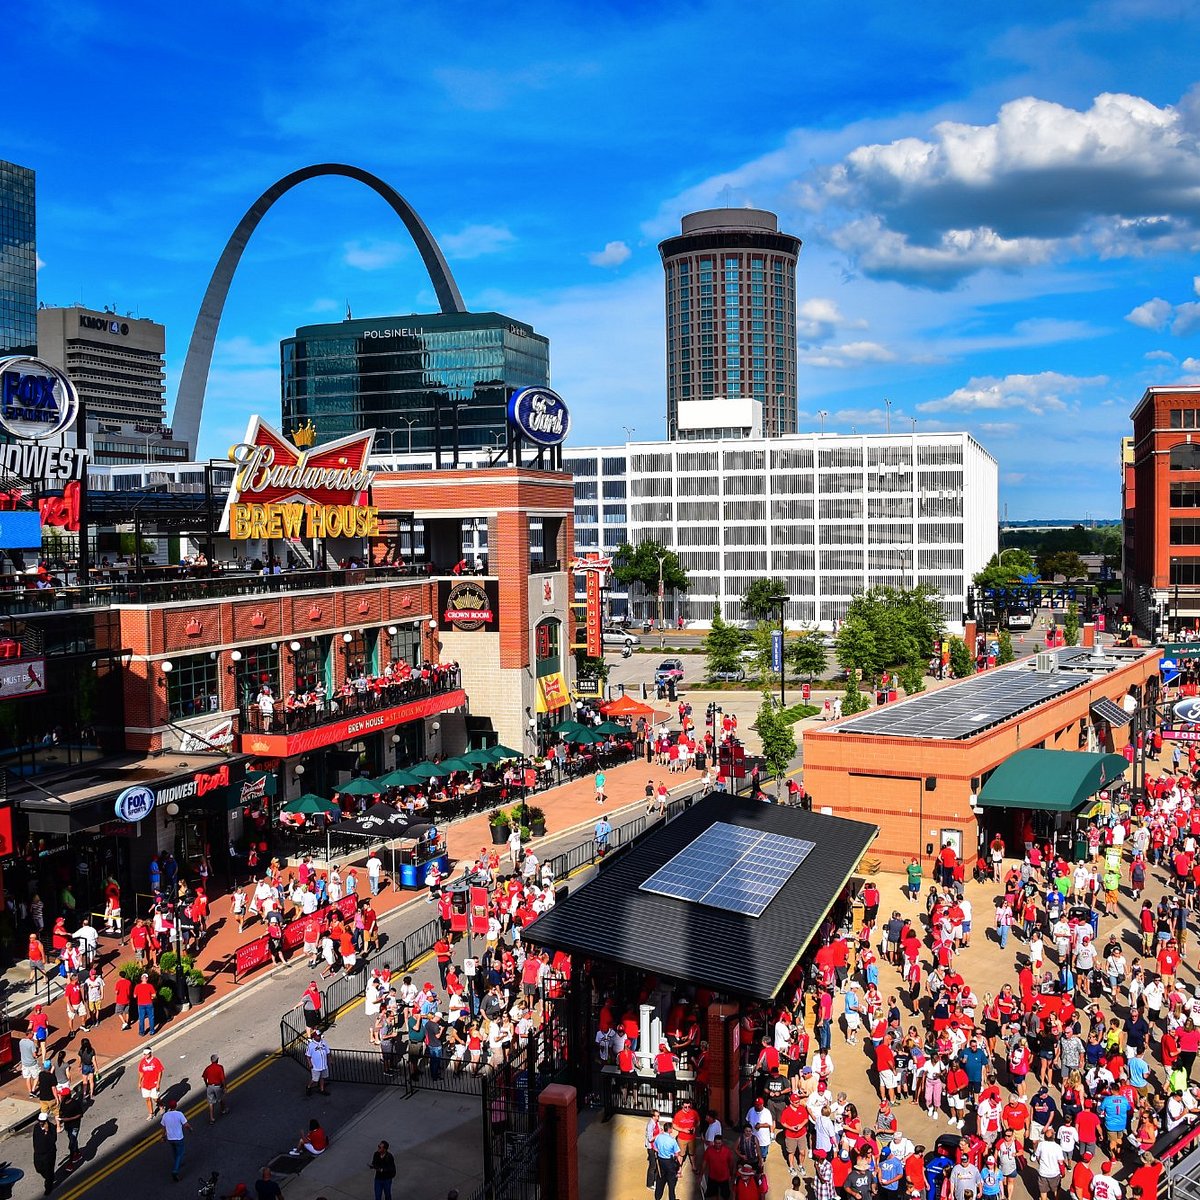 Visiting Busch Stadium: This Is What You Need to Know